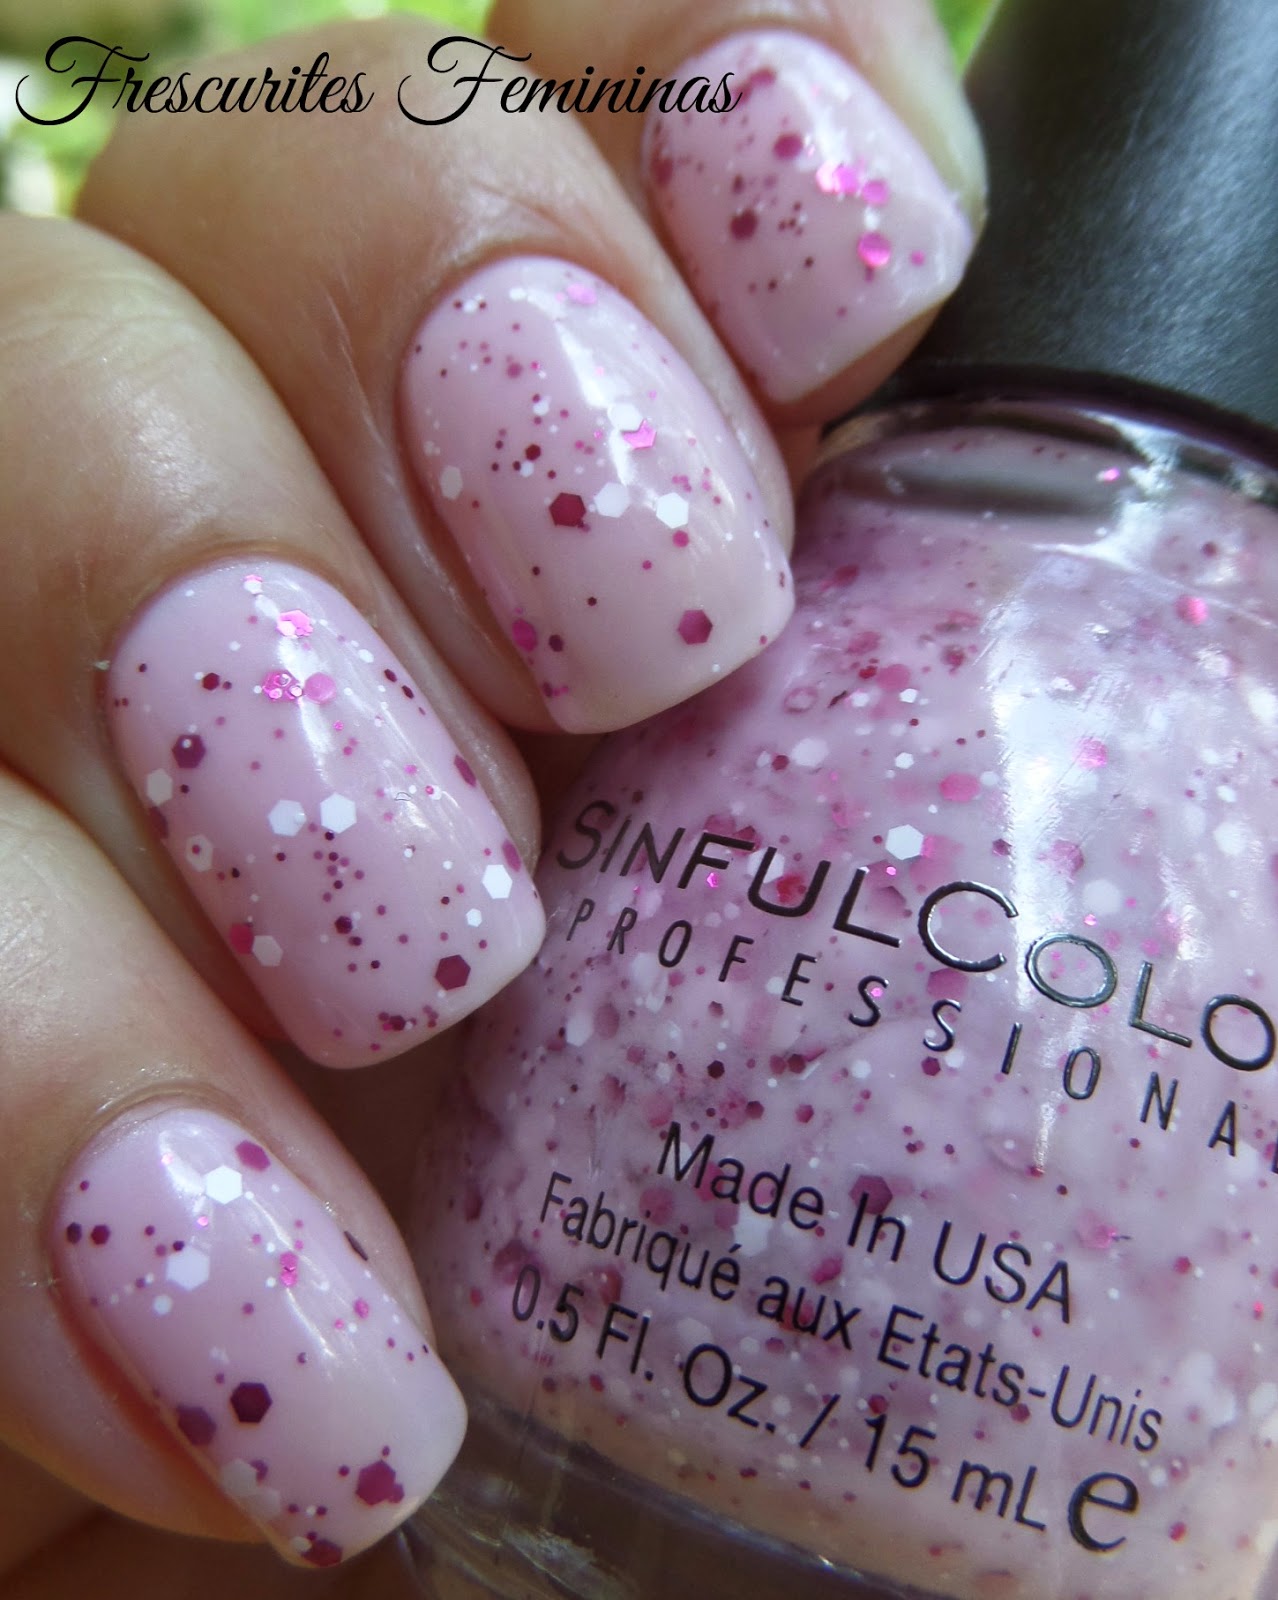 Sinful Colors, Flower Power,Bloomblast, Swatch, Nail swatch, Frescurites Femininas